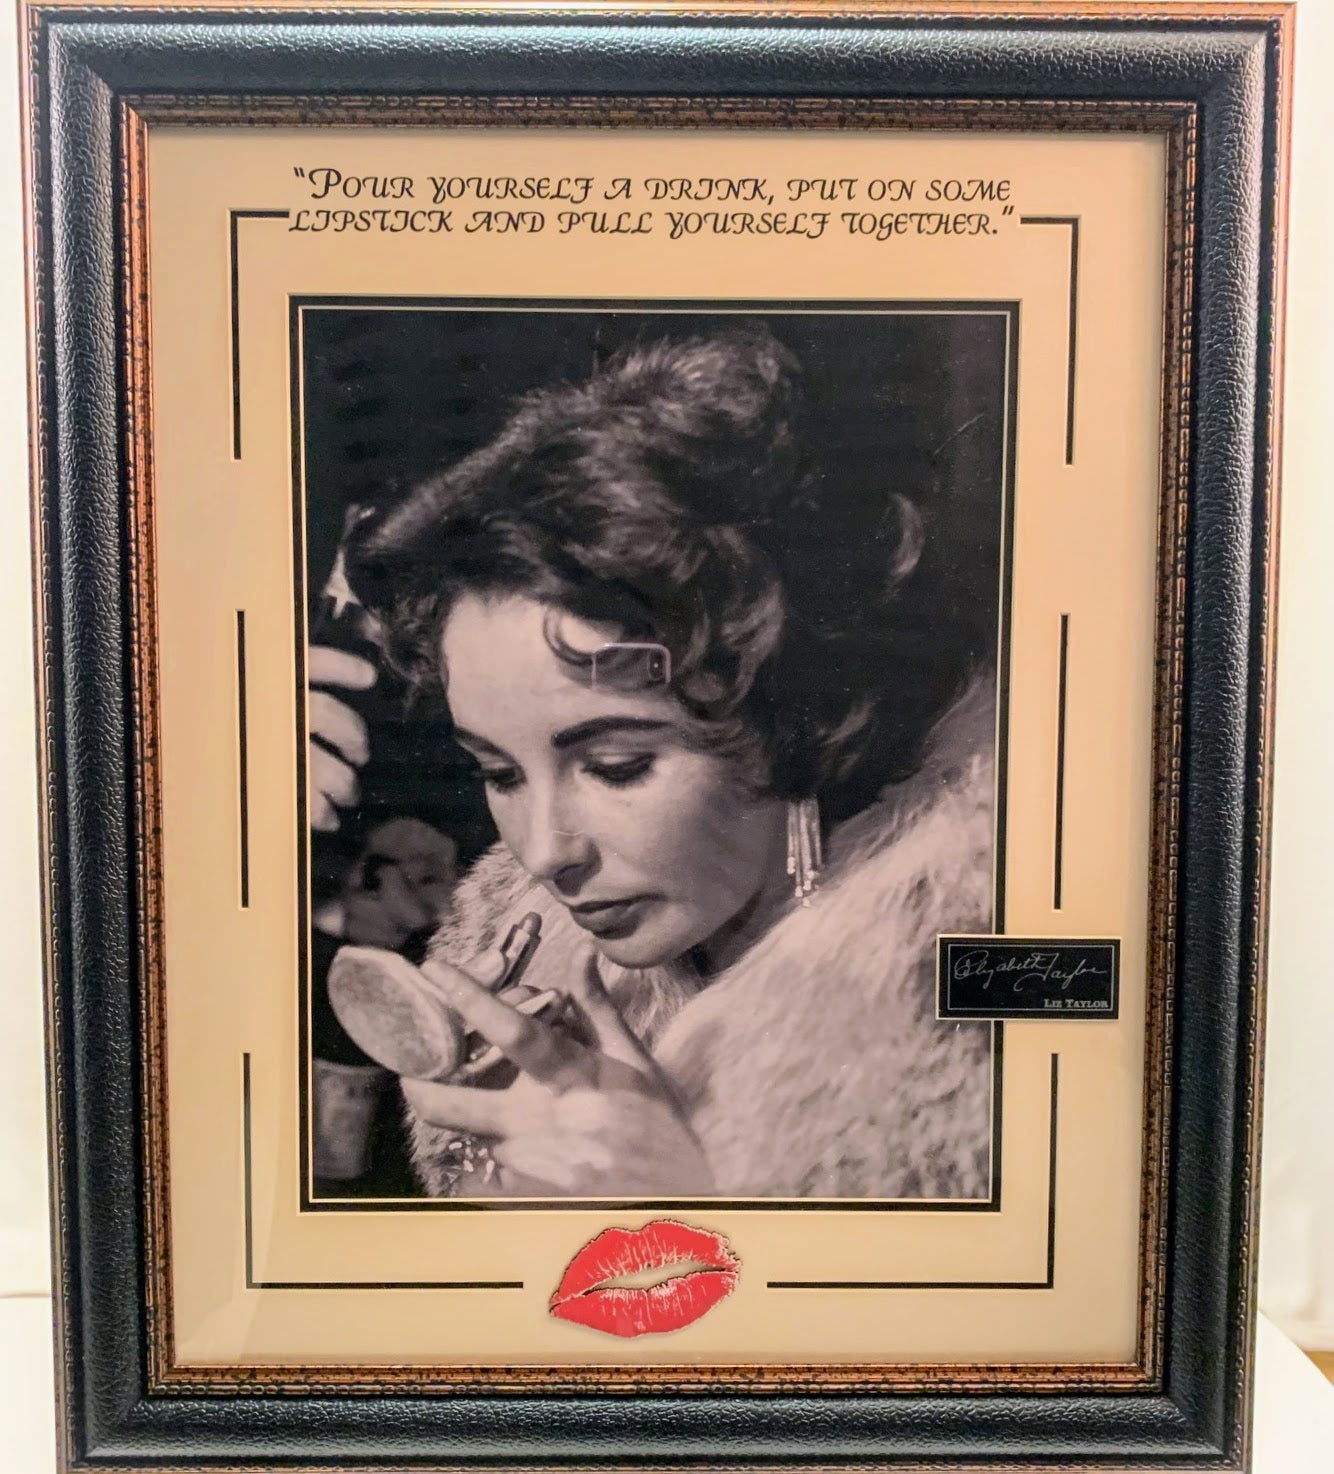 Liz Taylor Lipstick Photo Framed with Quote and Laser Engraved Signature